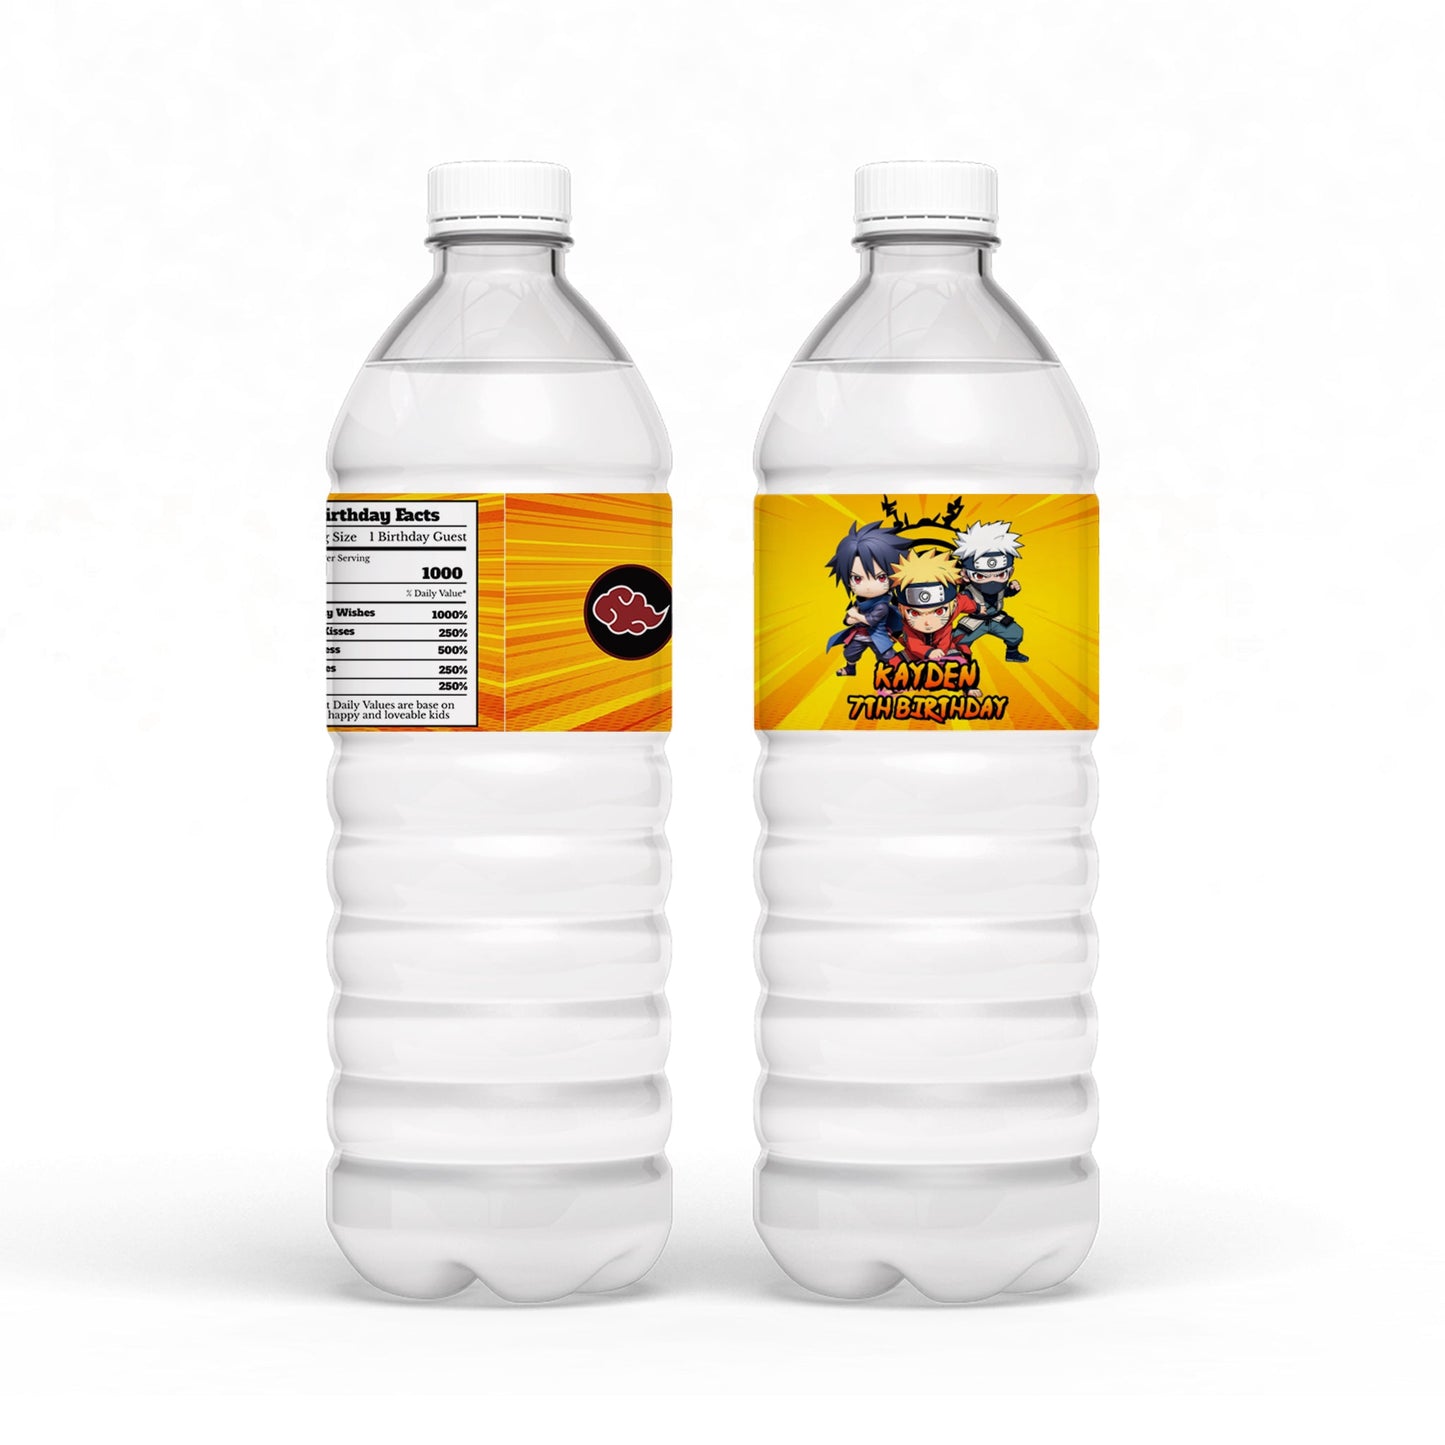 Naruto themed water bottle label